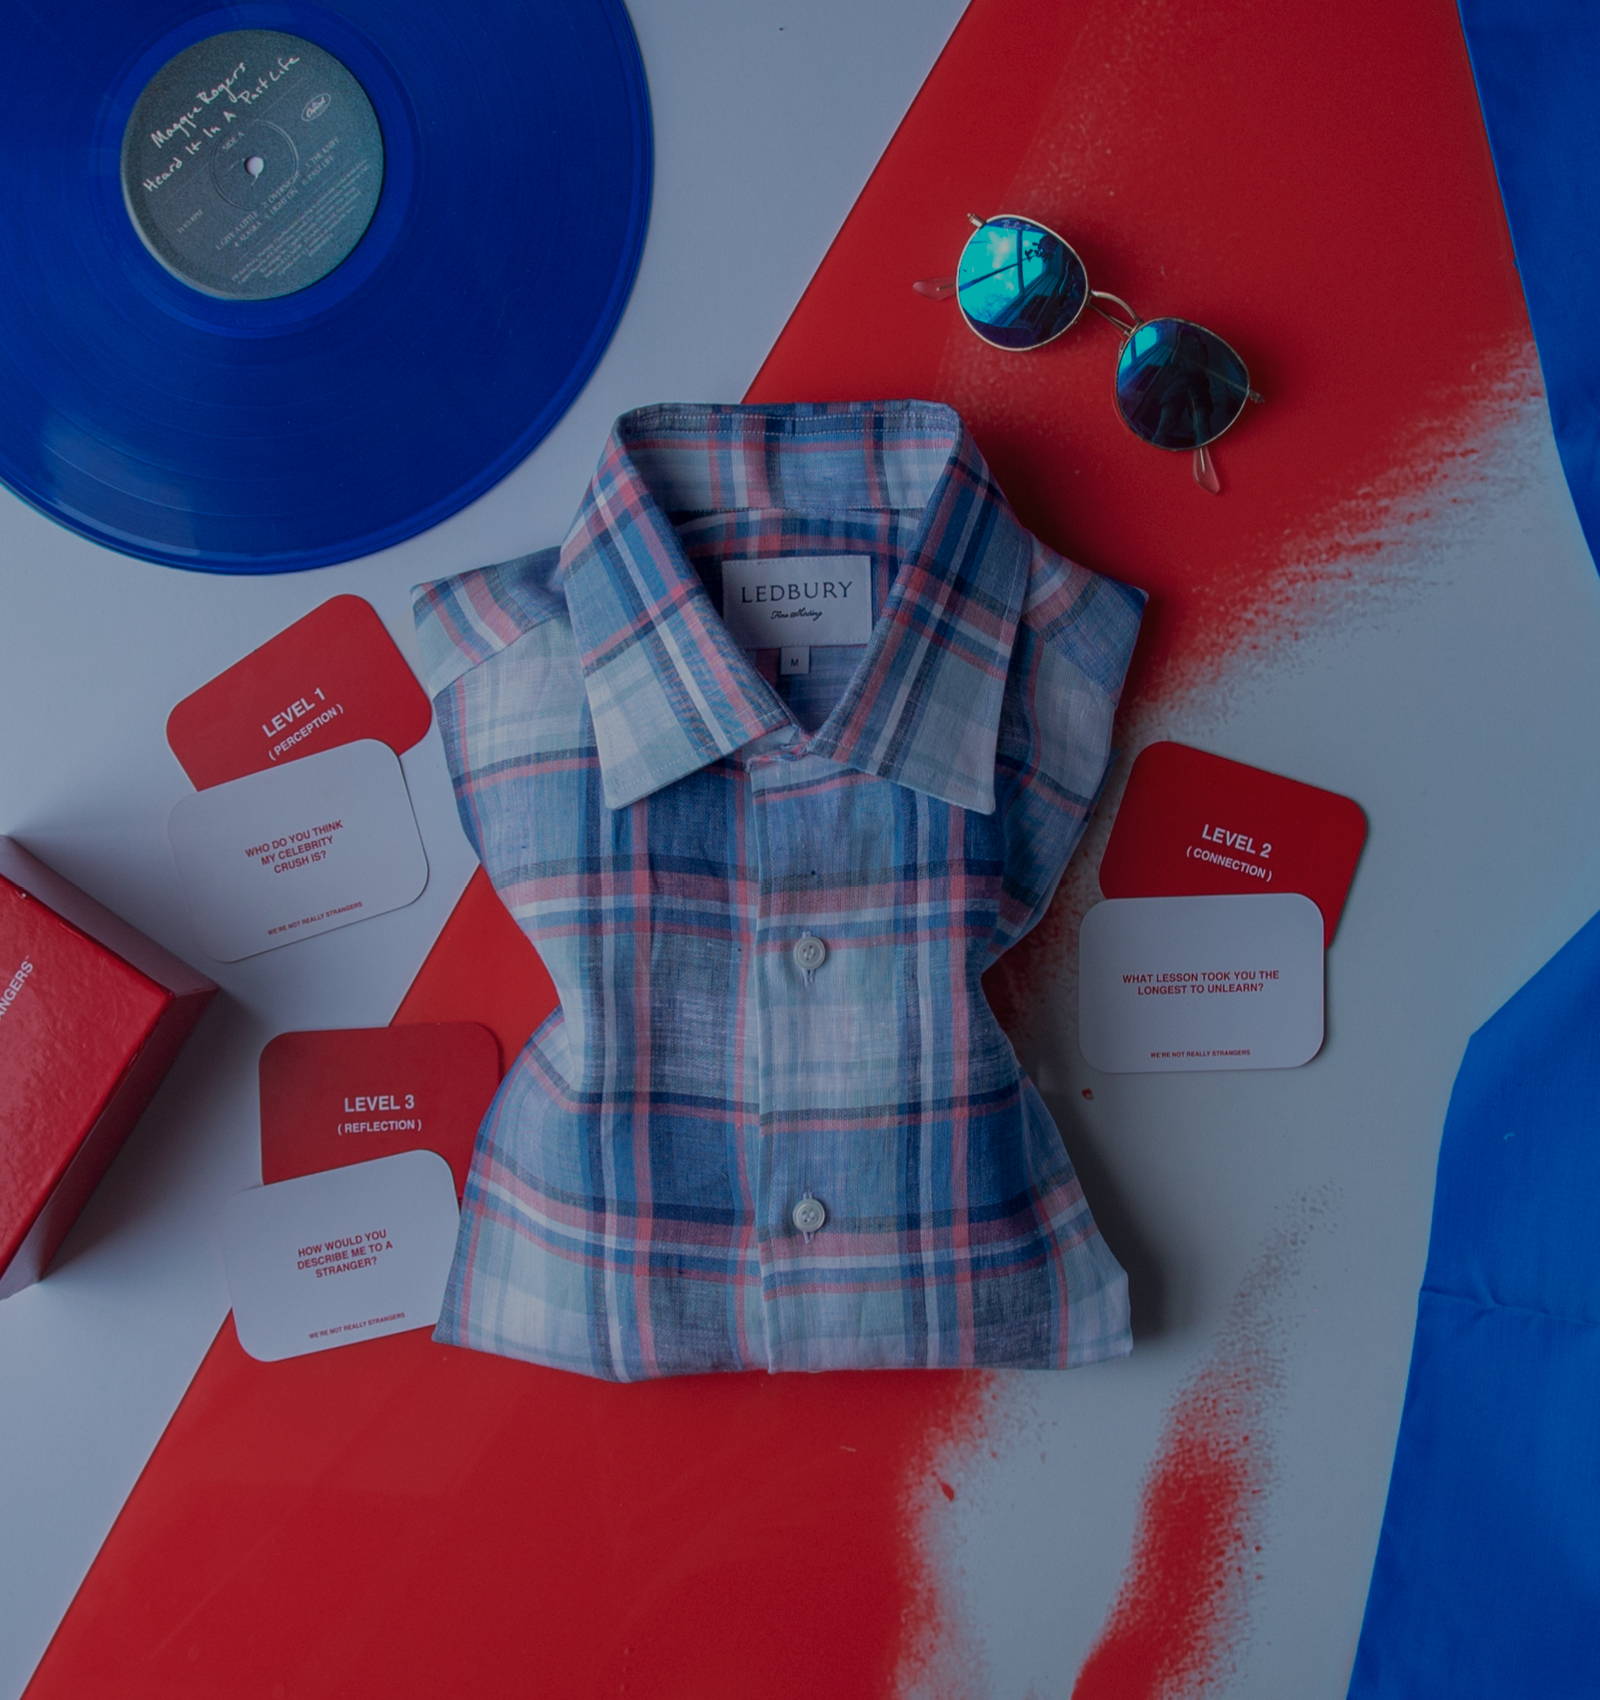 The Cerulean Blue Deacon Linen Plaid Casual Shirt surrounded by card games, a record and sunglasses